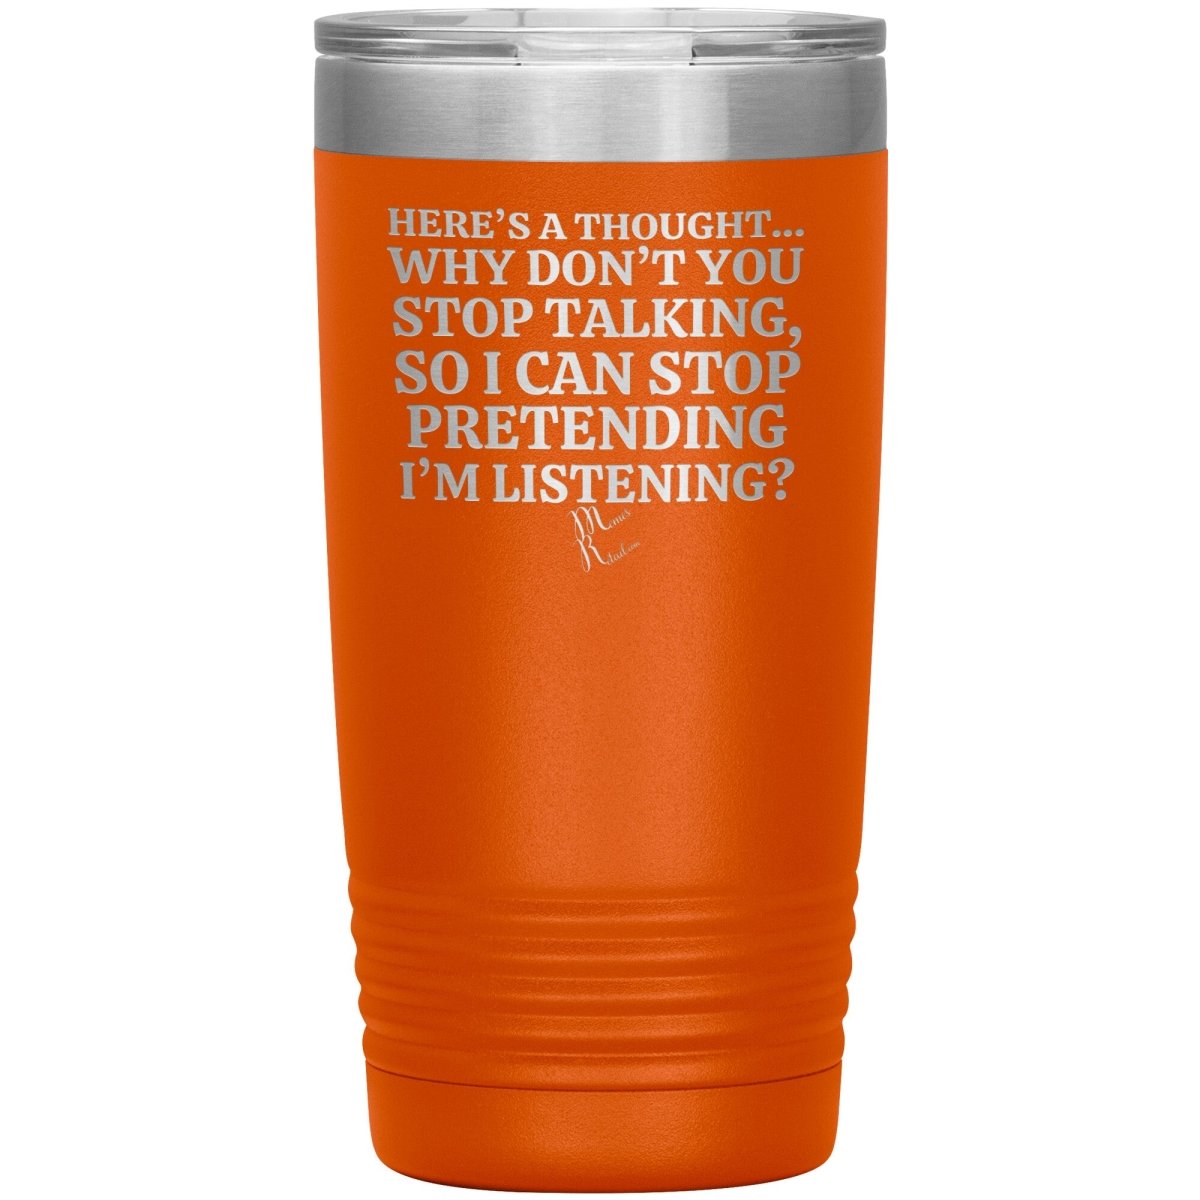 Here's A Thought...Why Don't You Stop Talking Tumblers, 20oz Insulated Tumbler / Orange - MemesRetail.com